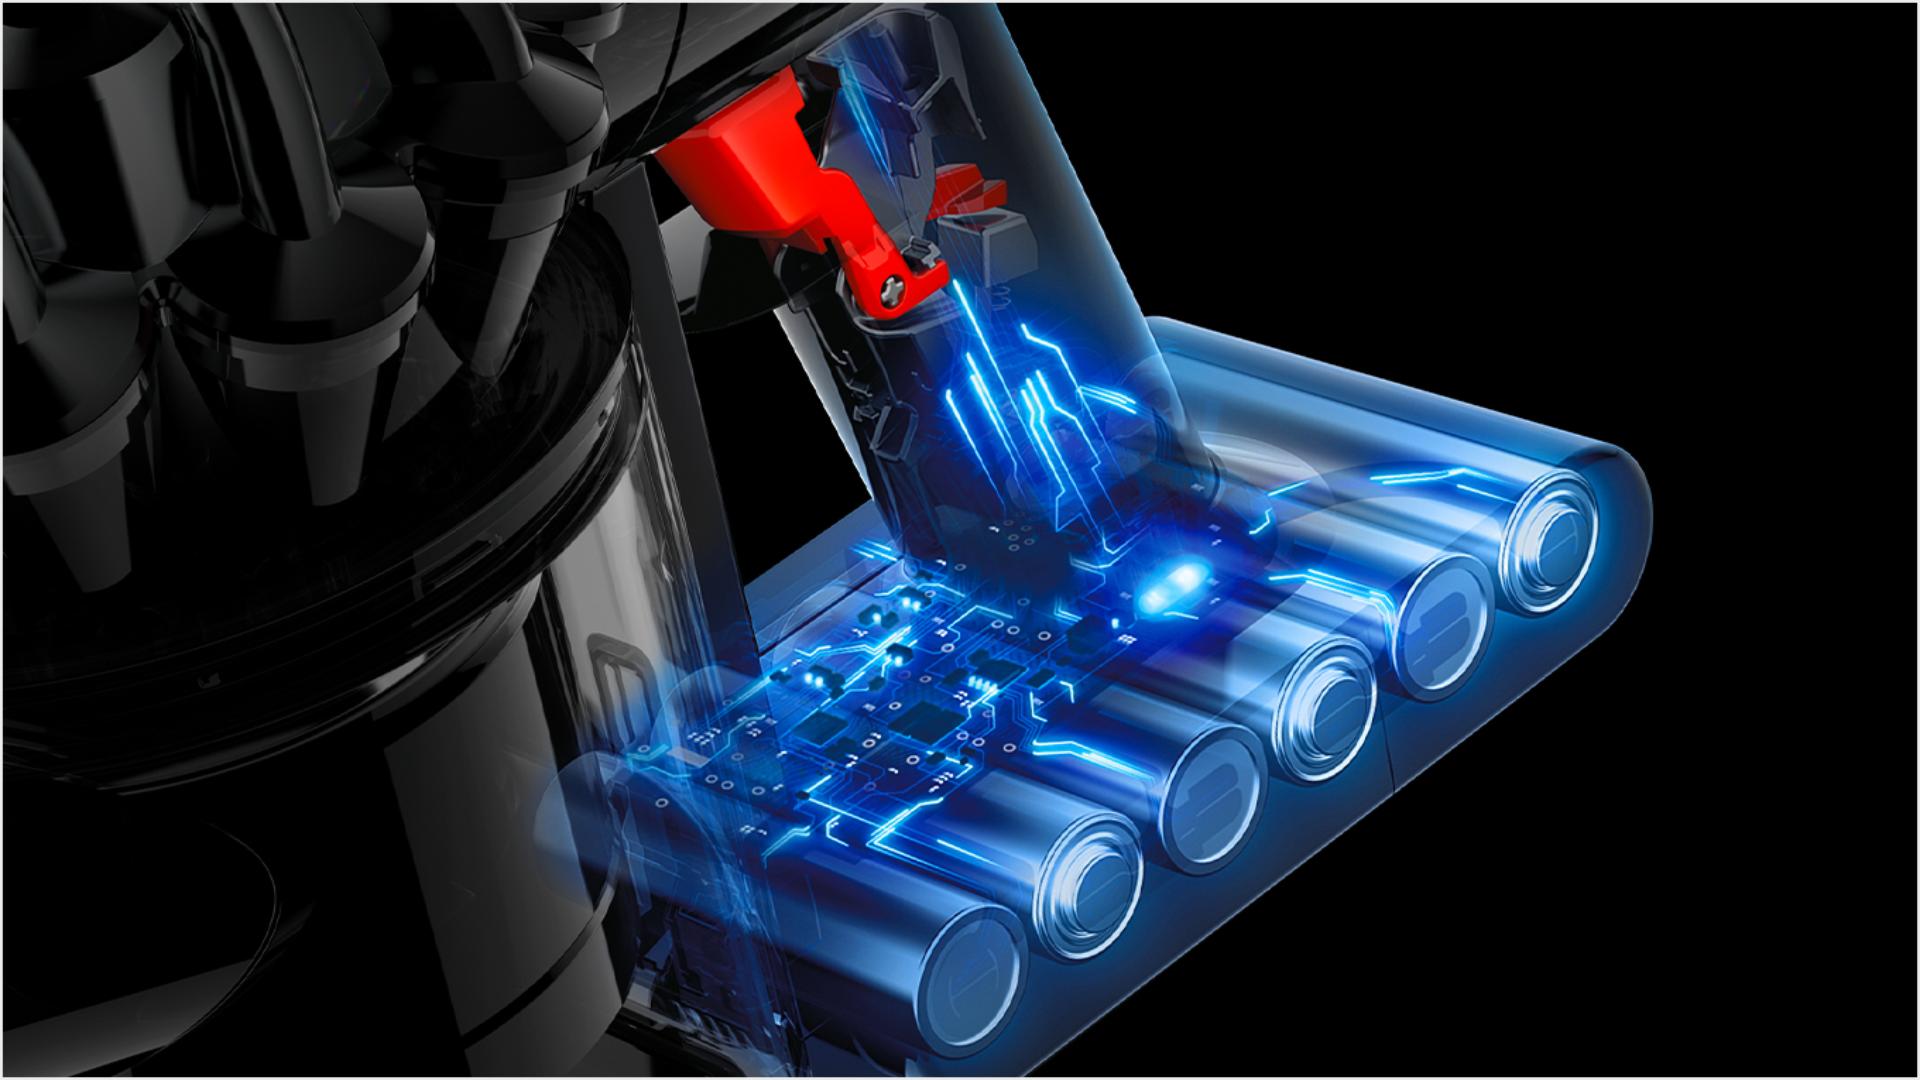 A cutaway of the battery pack inside the Dyson V8 Focus. The vivid blue illustration shows the cylindrical cells.